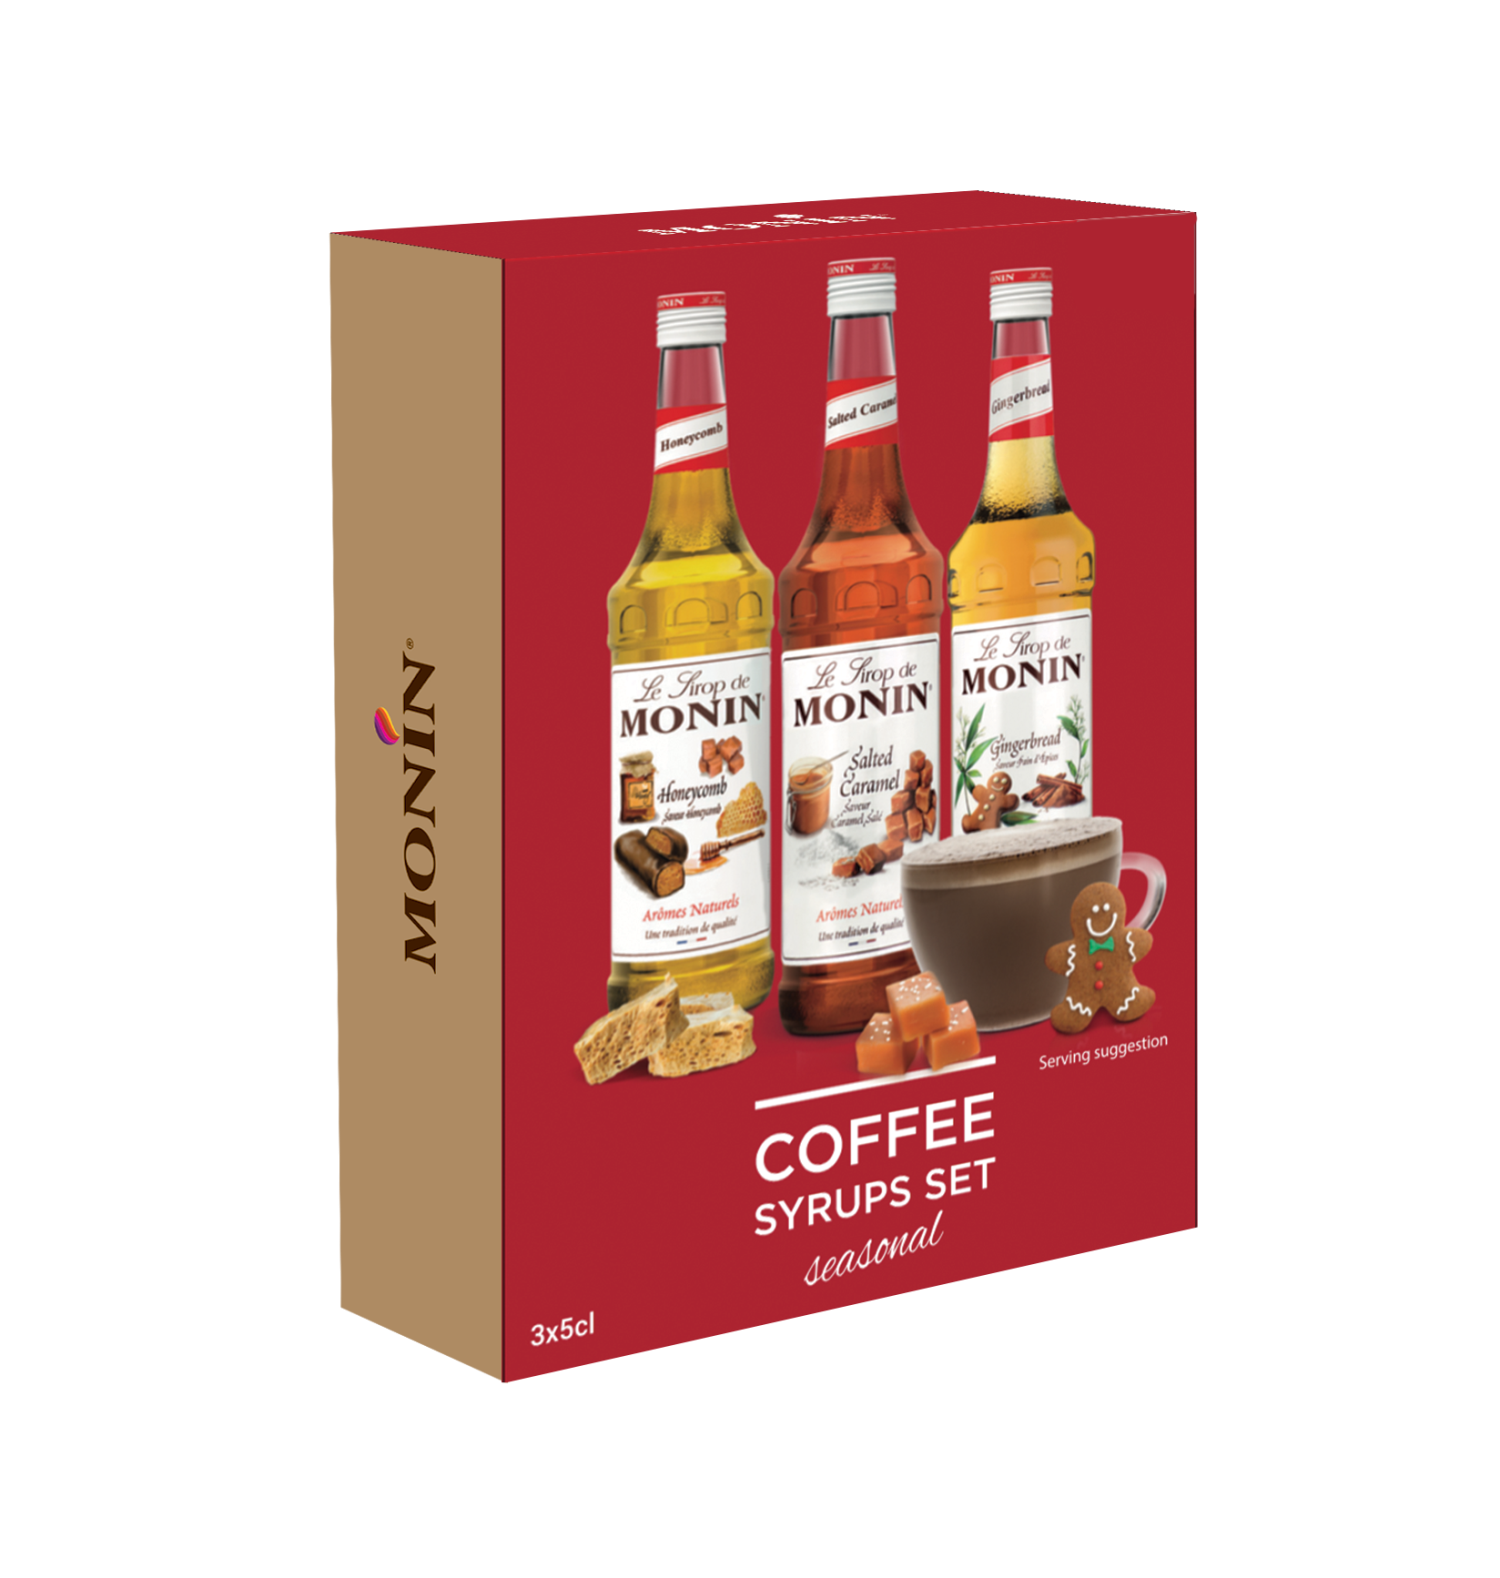 Buy MONIN’s best cocktail and coffee syrup gift sets